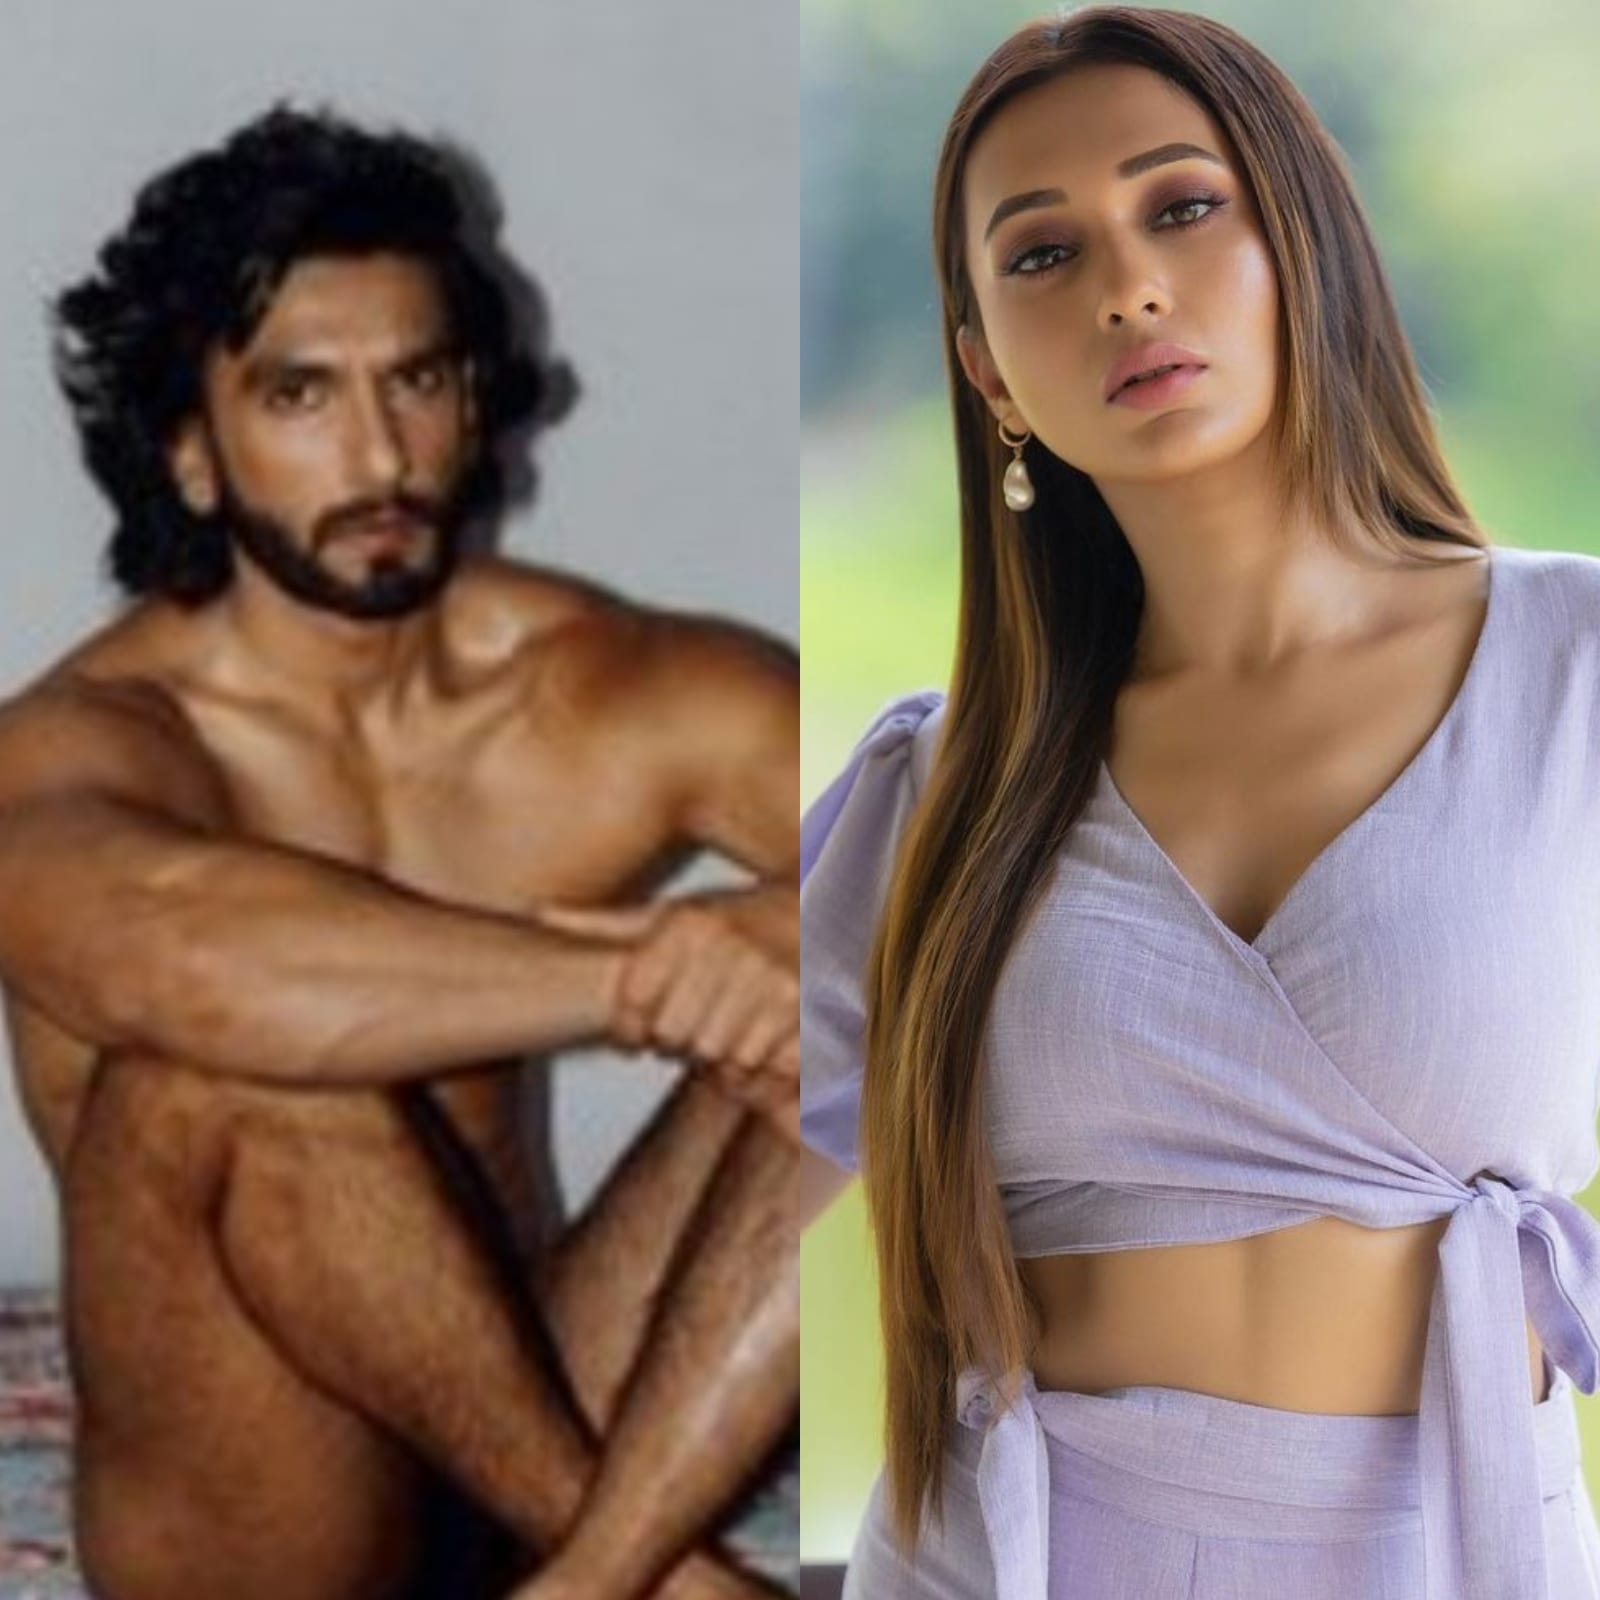 Seema Singh Xxx - Mimi Chakraborty on Ranveer Singh's Nude Photoshoot: 'Wonder If  Appreciation Would Have Been The Same...' - News18